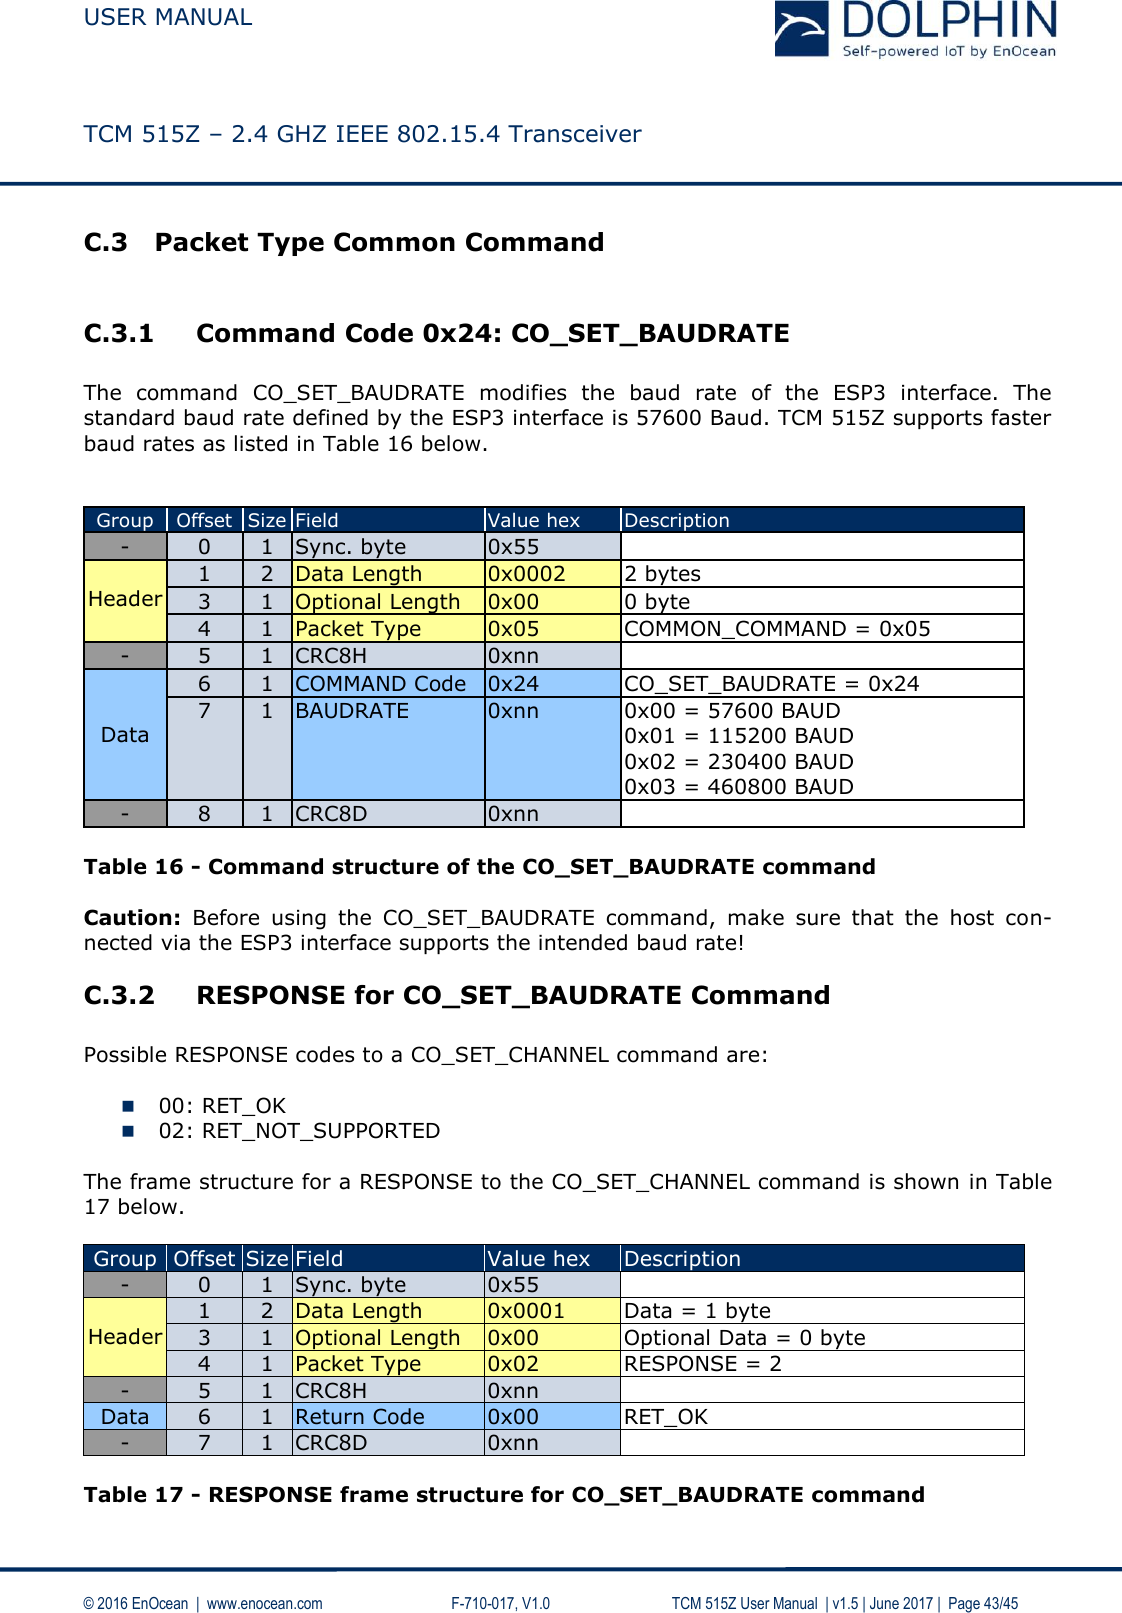  USER MANUAL    TCM 515Z – 2.4 GHZ IEEE 802.15.4 Transceiver   © 2016 EnOcean  |  www.enocean.com     F-710-017, V1.0        TCM 515Z User Manual  | v1.5 | June 2017 |  Page 43/45 C.3 Packet Type Common Command  C.3.1 Command Code 0x24: CO_SET_BAUDRATE  The  command  CO_SET_BAUDRATE  modifies  the  baud  rate  of  the  ESP3  interface.  The standard baud rate defined by the ESP3 interface is 57600 Baud. TCM 515Z supports faster baud rates as listed in Table 16 below.   Group Offset Size Field Value hex Description - 0 1 Sync. byte 0x55   Header 1 2 Data Length 0x0002 2 bytes 3 1 Optional Length 0x00 0 byte 4 1 Packet Type 0x05 COMMON_COMMAND = 0x05 - 5 1 CRC8H 0xnn  Data 6 1 COMMAND Code 0x24 CO_SET_BAUDRATE = 0x24 7 1 BAUDRATE 0xnn 0x00 = 57600 BAUD 0x01 = 115200 BAUD 0x02 = 230400 BAUD 0x03 = 460800 BAUD - 8 1 CRC8D 0xnn   Table 16 - Command structure of the CO_SET_BAUDRATE command  Caution:  Before  using  the  CO_SET_BAUDRATE  command,  make  sure  that  the  host  con-nected via the ESP3 interface supports the intended baud rate! C.3.2 RESPONSE for CO_SET_BAUDRATE Command  Possible RESPONSE codes to a CO_SET_CHANNEL command are:   00: RET_OK  02: RET_NOT_SUPPORTED  The frame structure for a RESPONSE to the CO_SET_CHANNEL command is shown in Table 17 below.  Group Offset Size Field Value hex Description - 0 1 Sync. byte 0x55   Header 1 2 Data Length 0x0001 Data = 1 byte 3 1 Optional Length 0x00 Optional Data = 0 byte 4 1 Packet Type 0x02 RESPONSE = 2 - 5 1 CRC8H 0xnn  Data 6 1 Return Code 0x00 RET_OK - 7 1 CRC8D 0xnn   Table 17 - RESPONSE frame structure for CO_SET_BAUDRATE command 